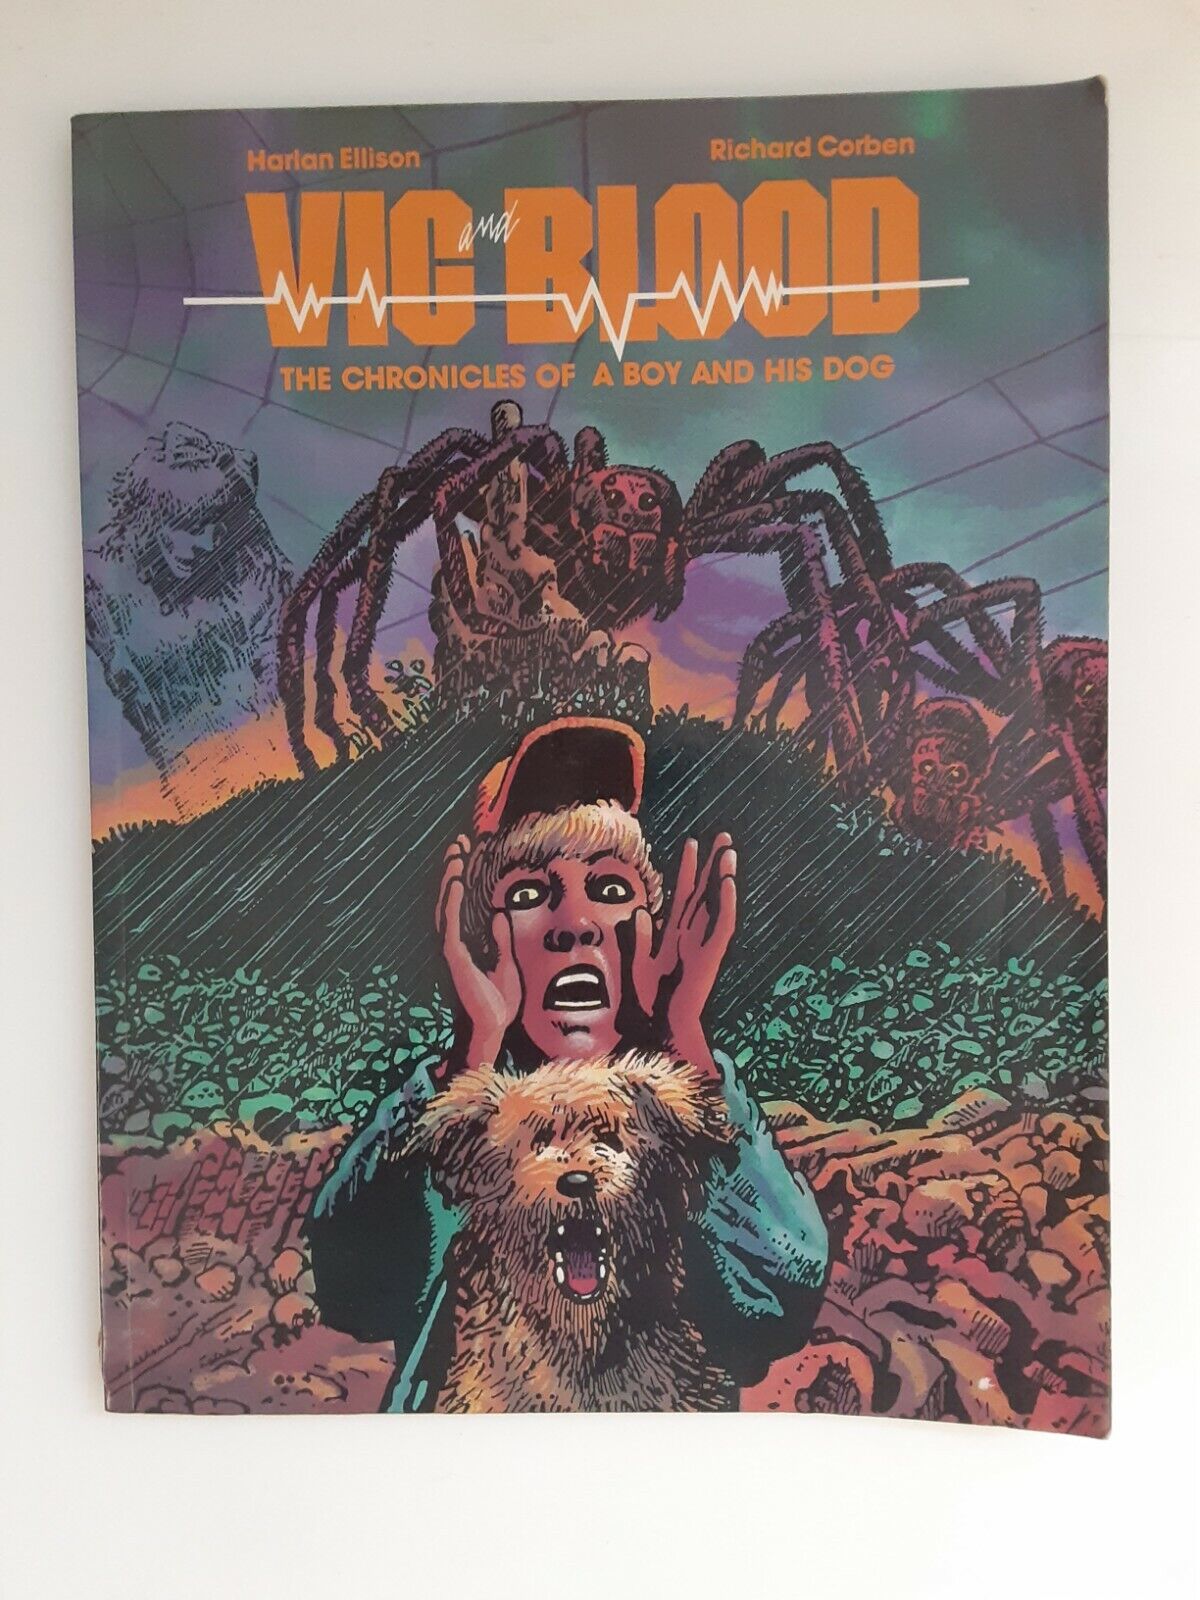 Vic and Blood The Chronicles of a Boy and His Dog Harlan Ellison Richard Corben 